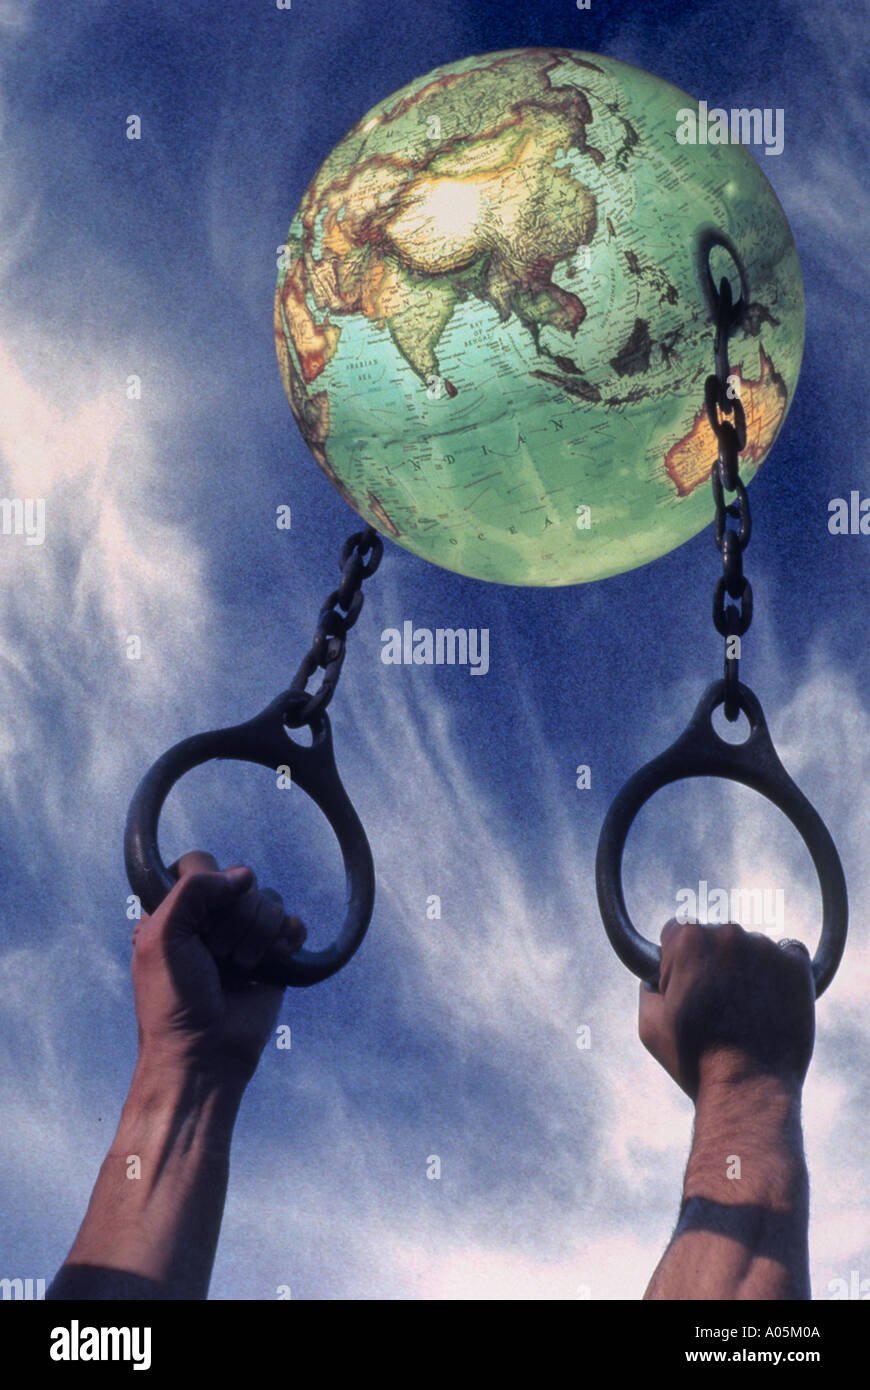 Conceptual image of a pair of hands holding onto chain rings which are attached to a globe denoting global control Stock Photo